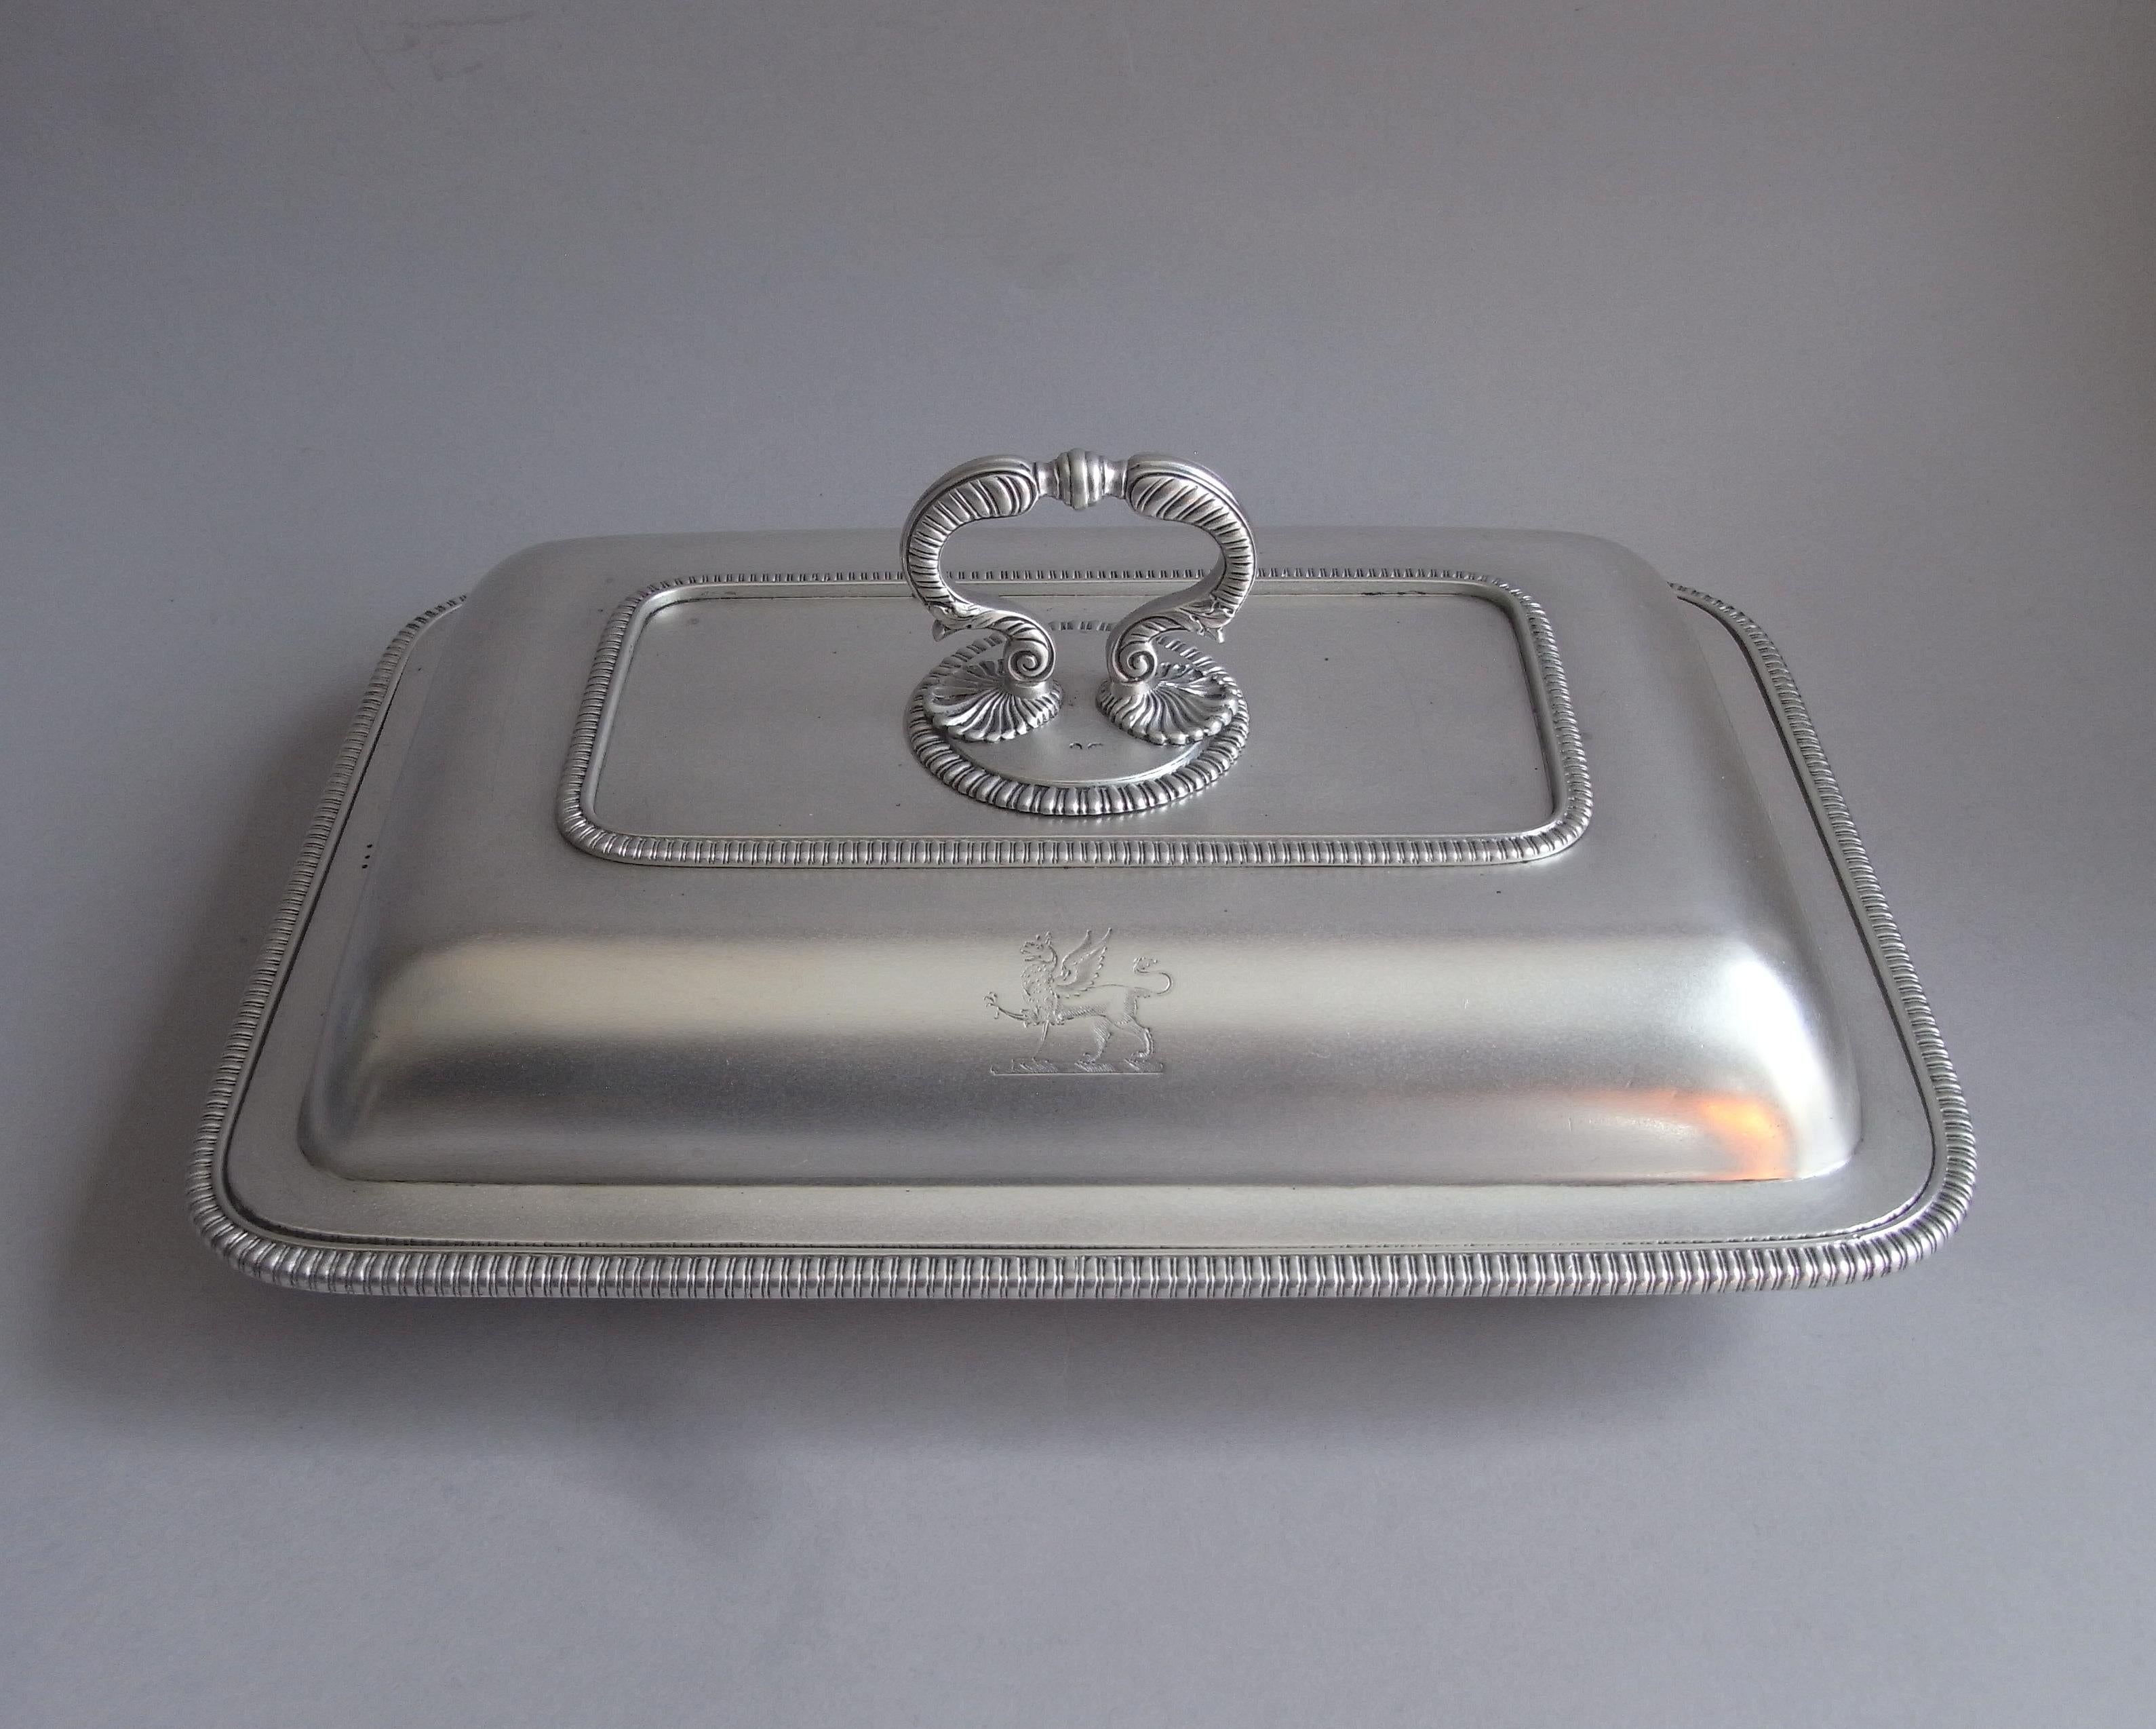 This exceptional pair of George III antique sterling silver entree dishes were made in London in 1800 by Richard Cooke. The Dishes are rectangular in form, with lobed borders, and terminate in a most unusual double scroll handle mounted on two